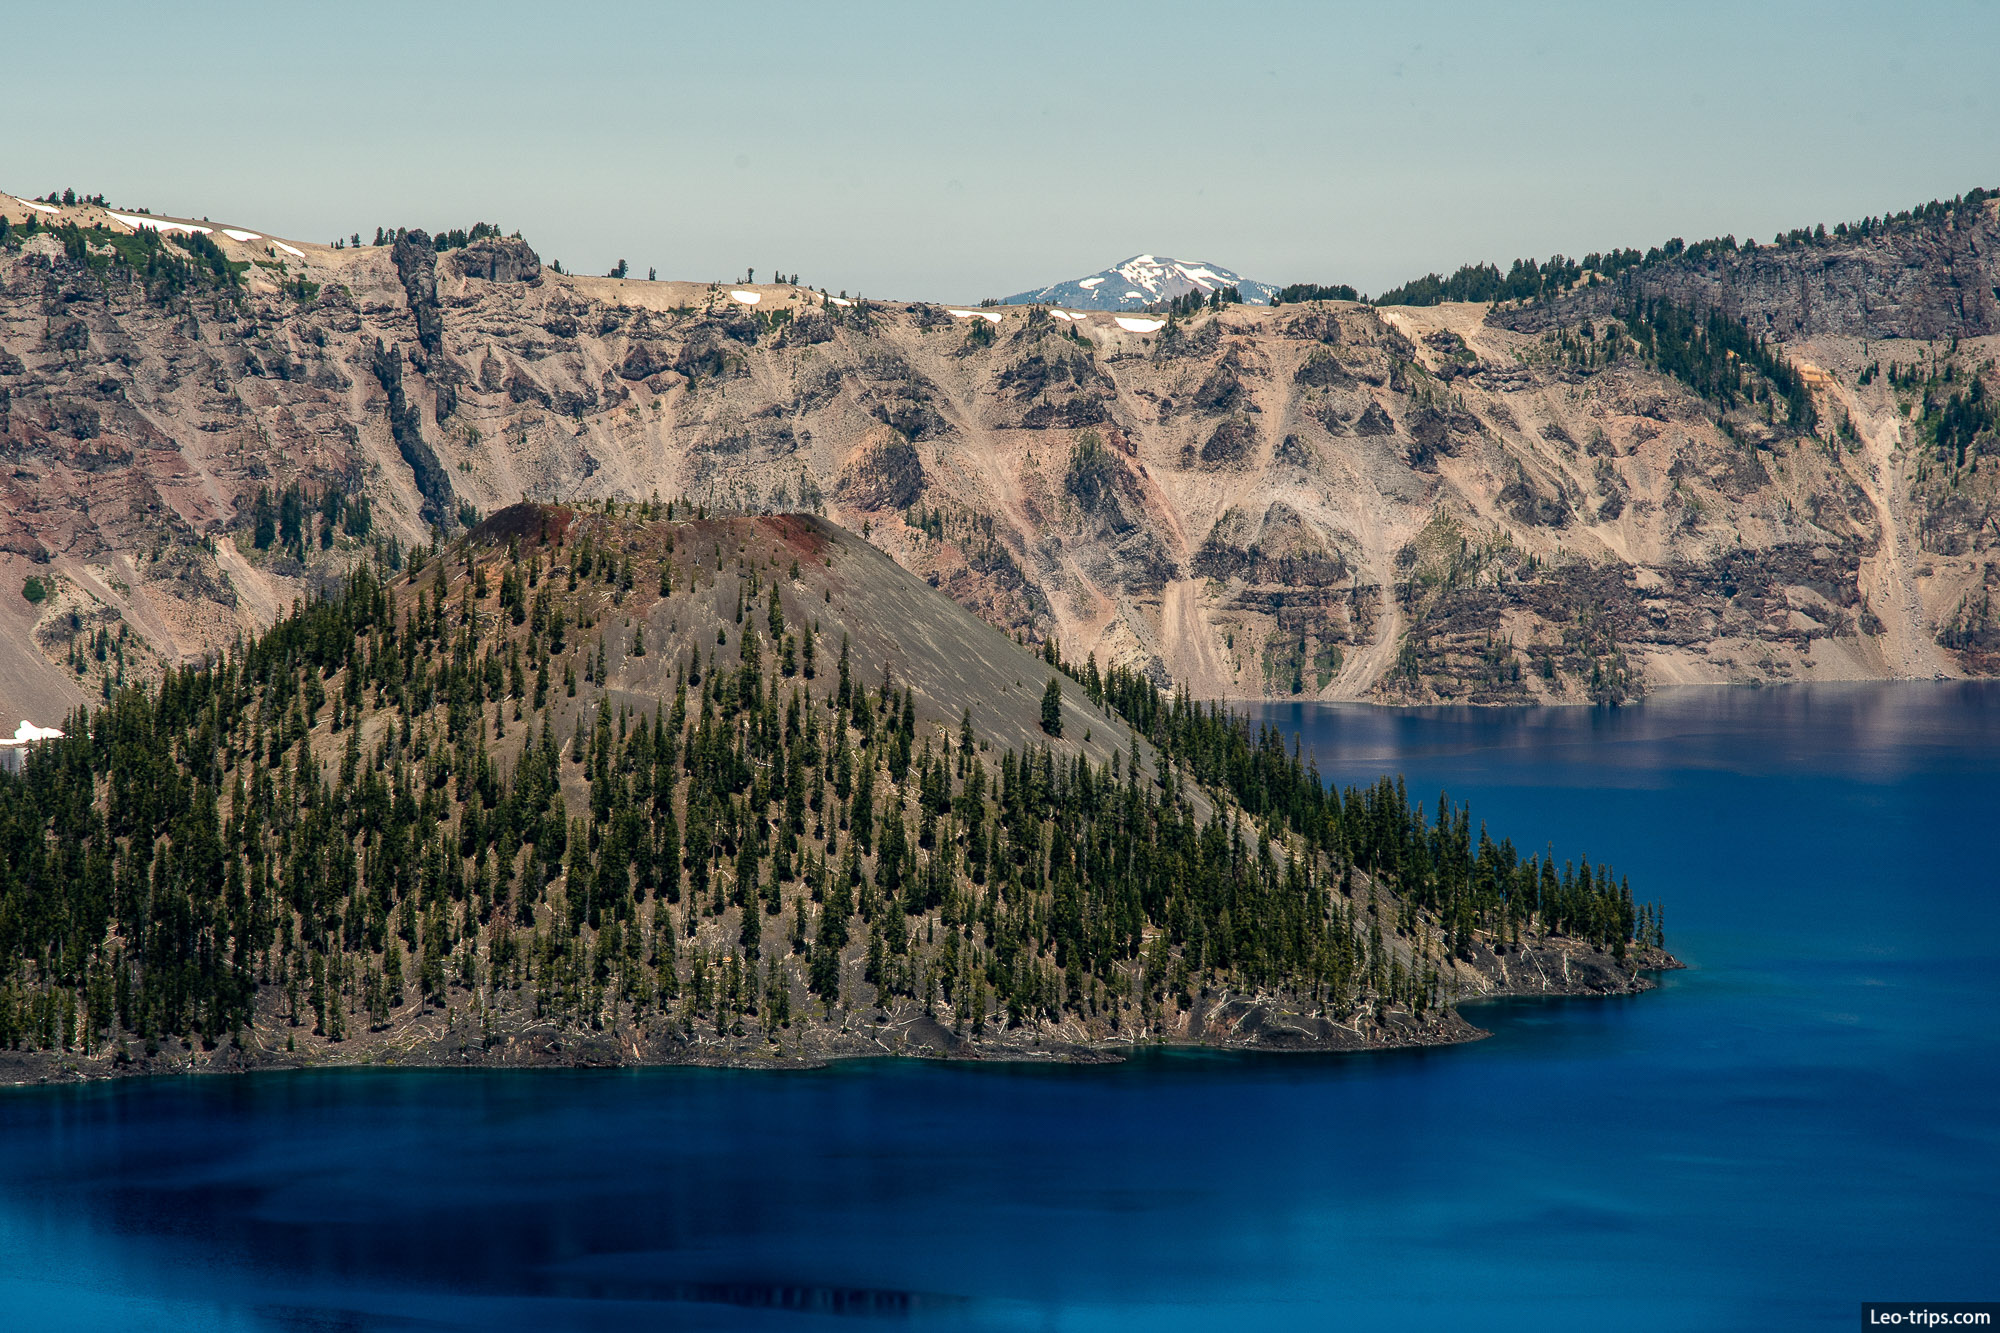 wizard island and crater lake shore crater lake national park